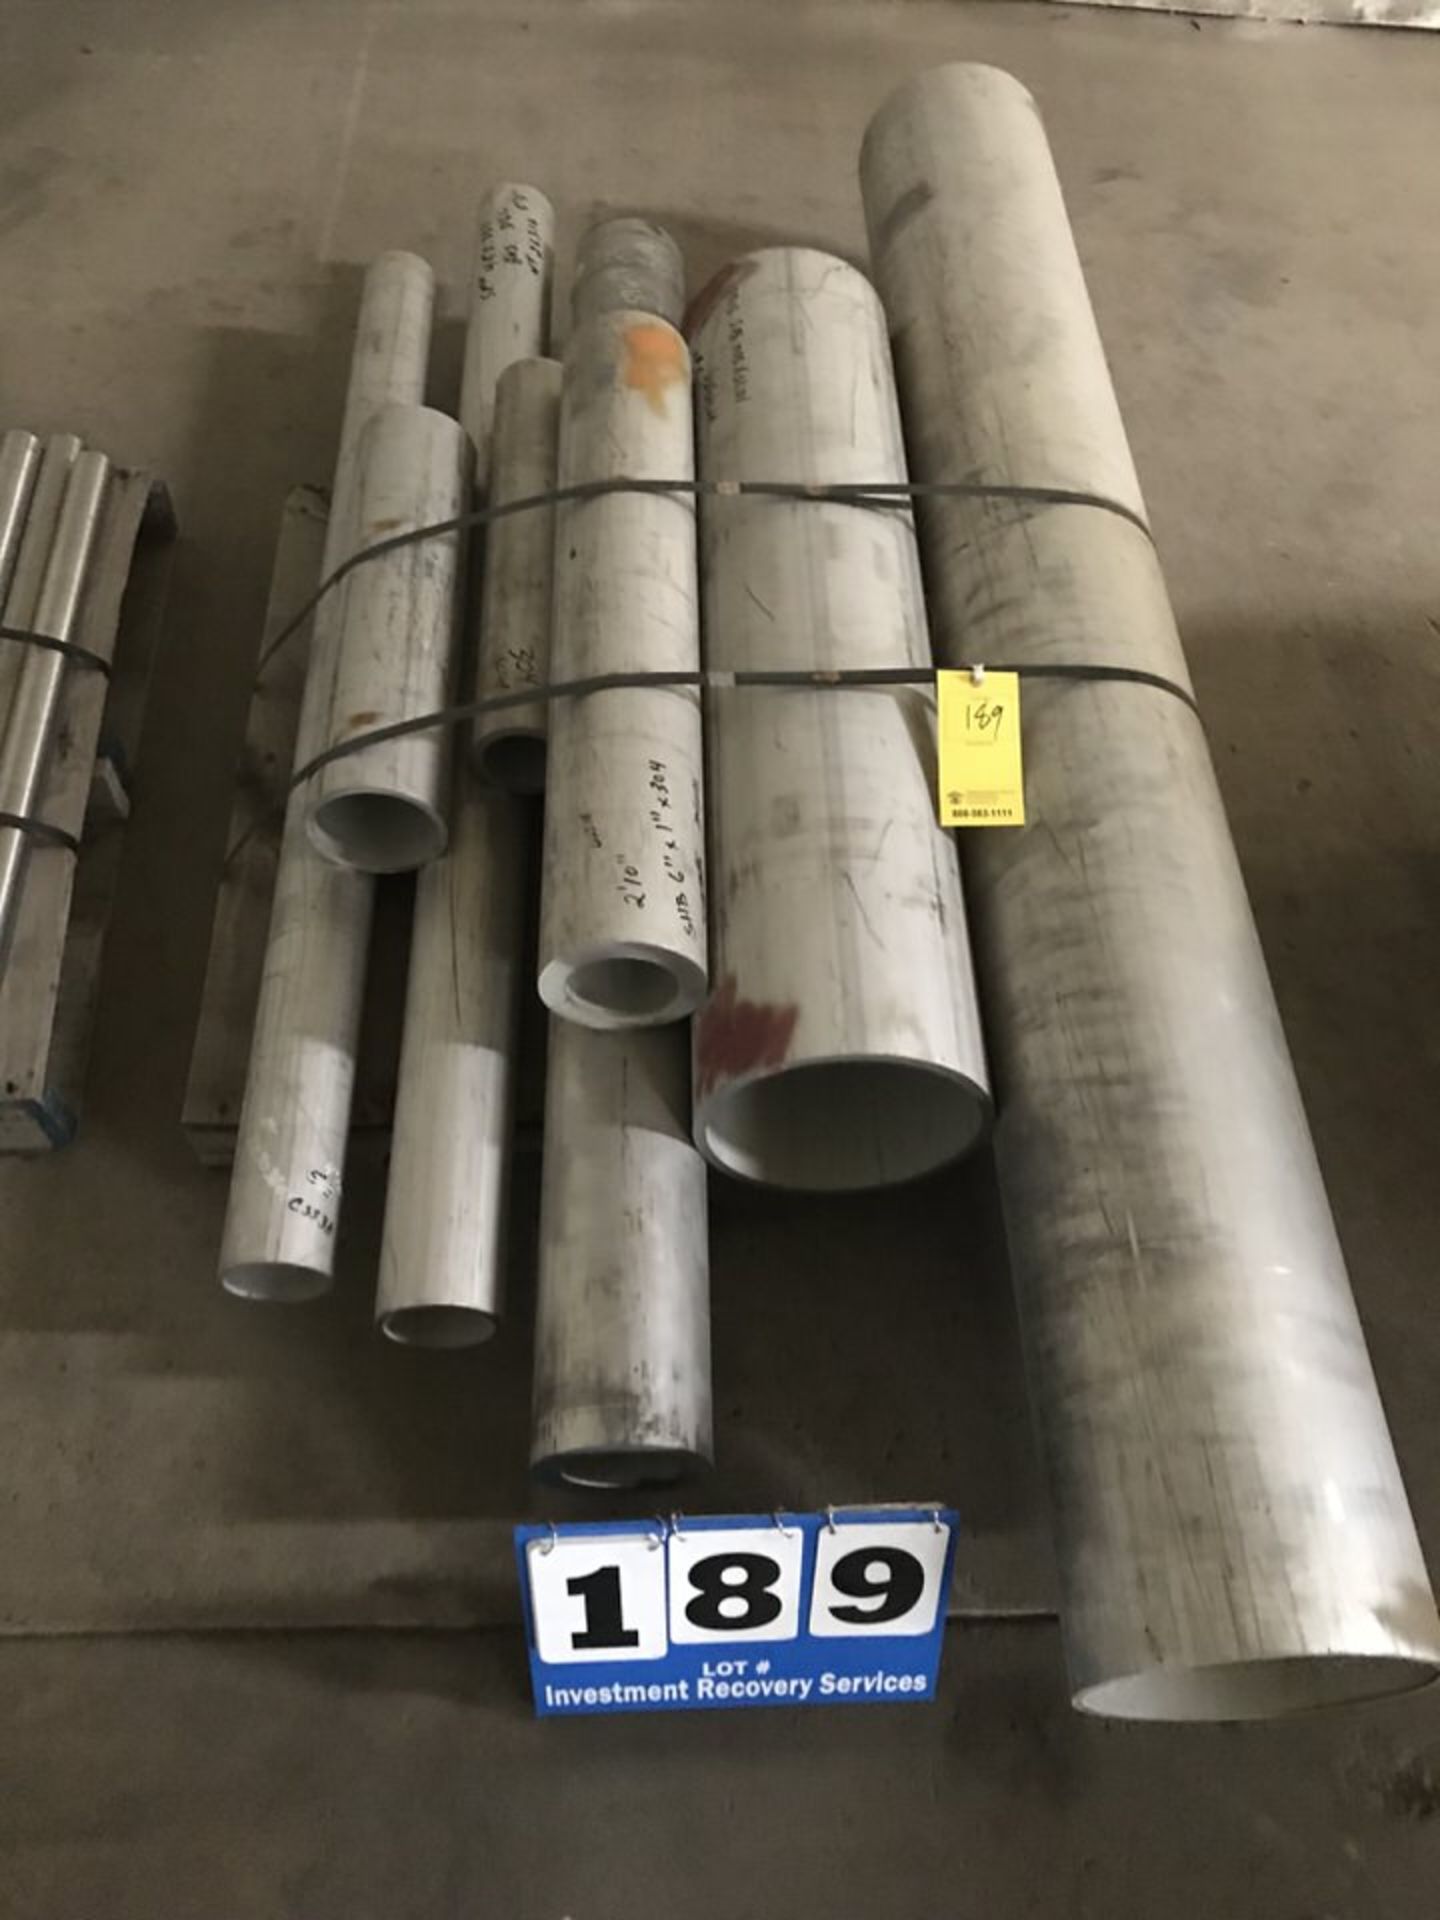 MIX 303/ 304/ 316 STAINLESS STEEL TUBING MATERIAL, APPROX 910 LBS, (1) 4' X 10 3/4" X 1/2" WALL, (1)